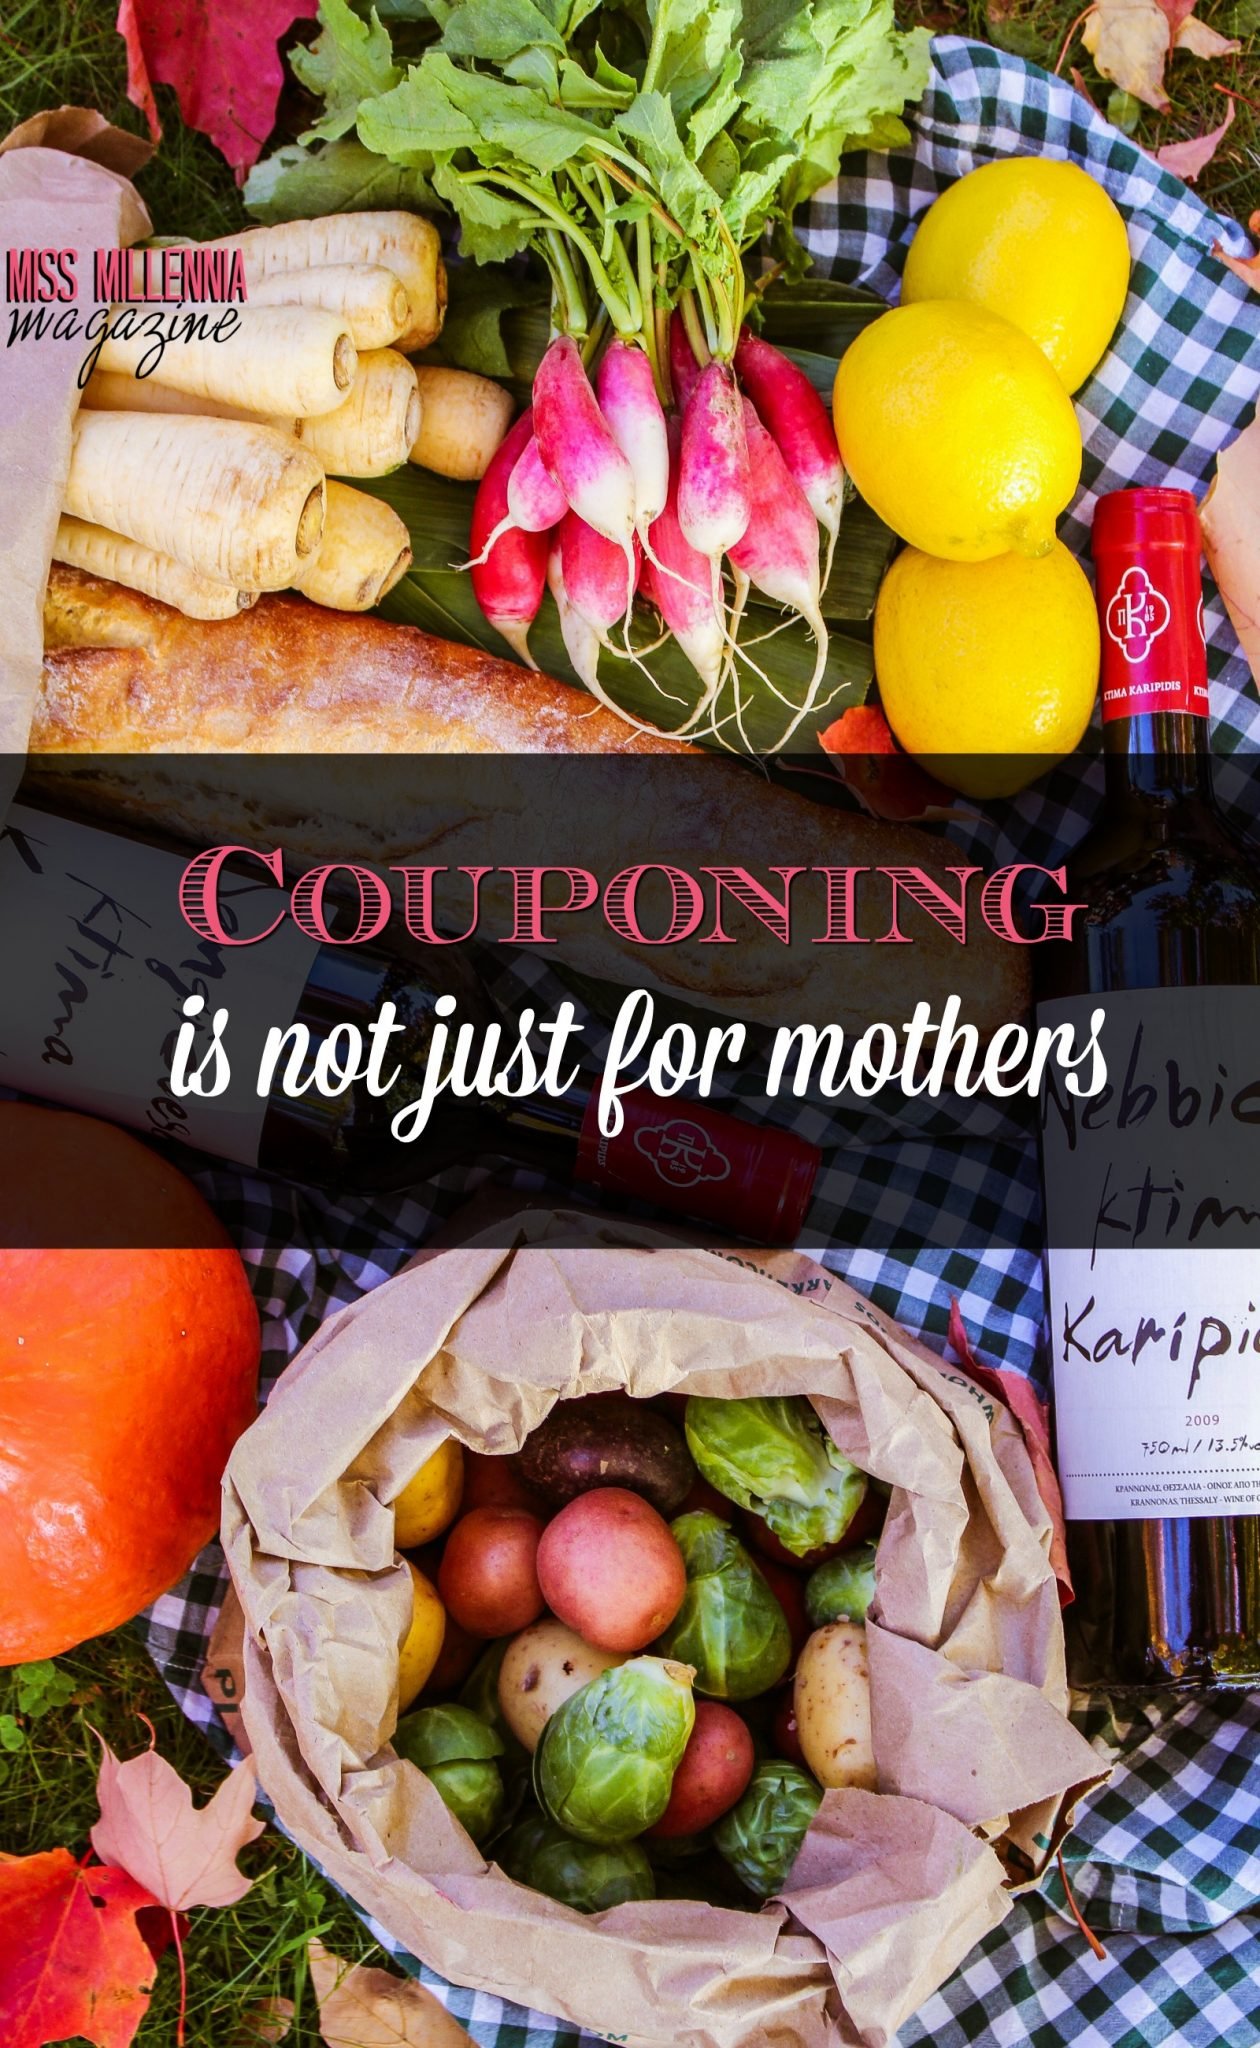 Couponing Is Not Just for Mothers